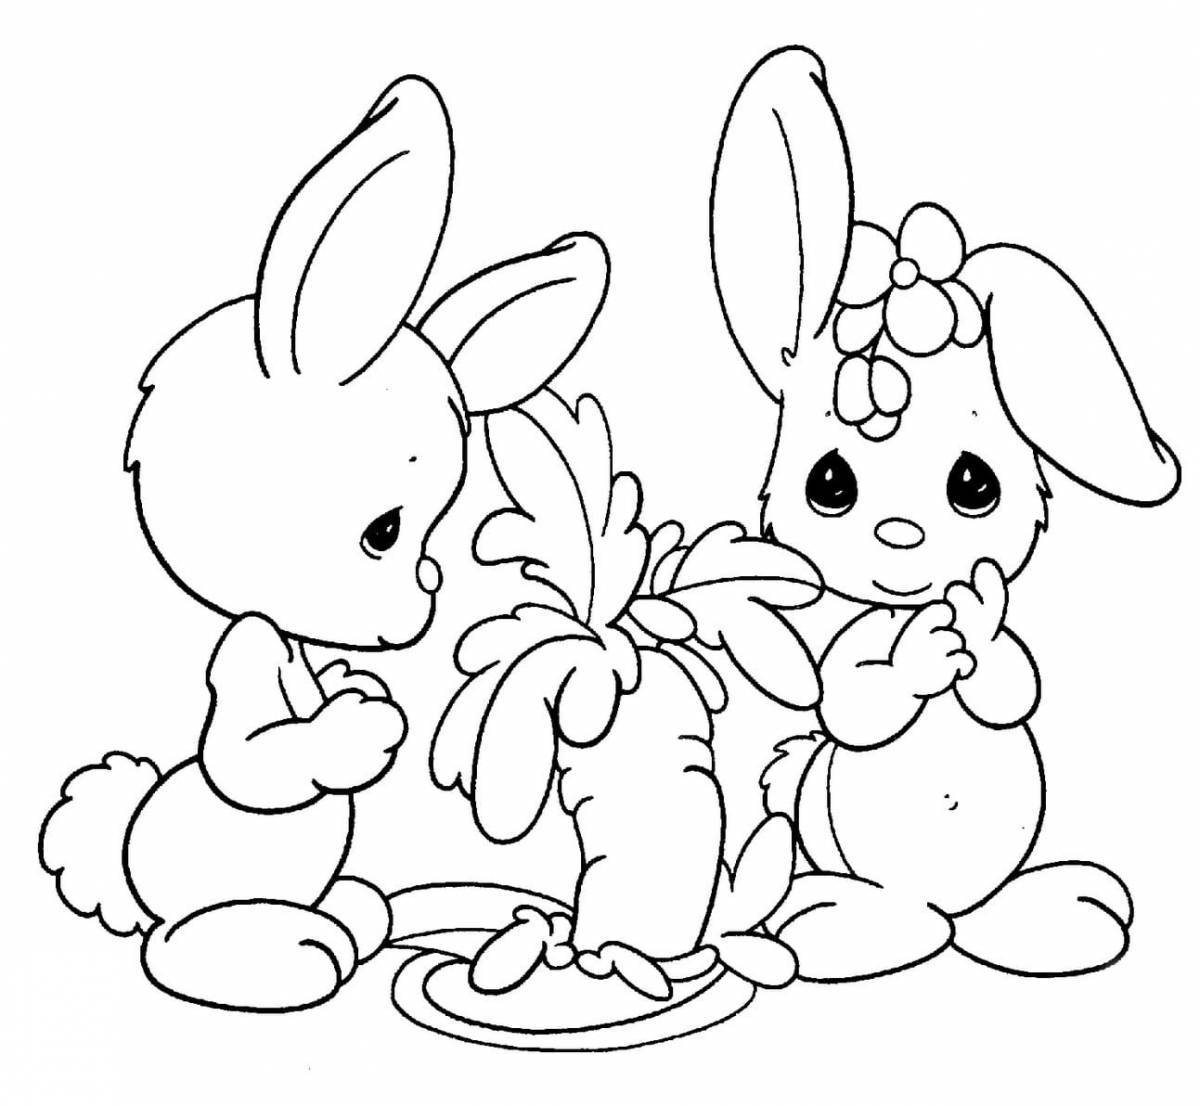 Fuzzy coloring page bunny picture